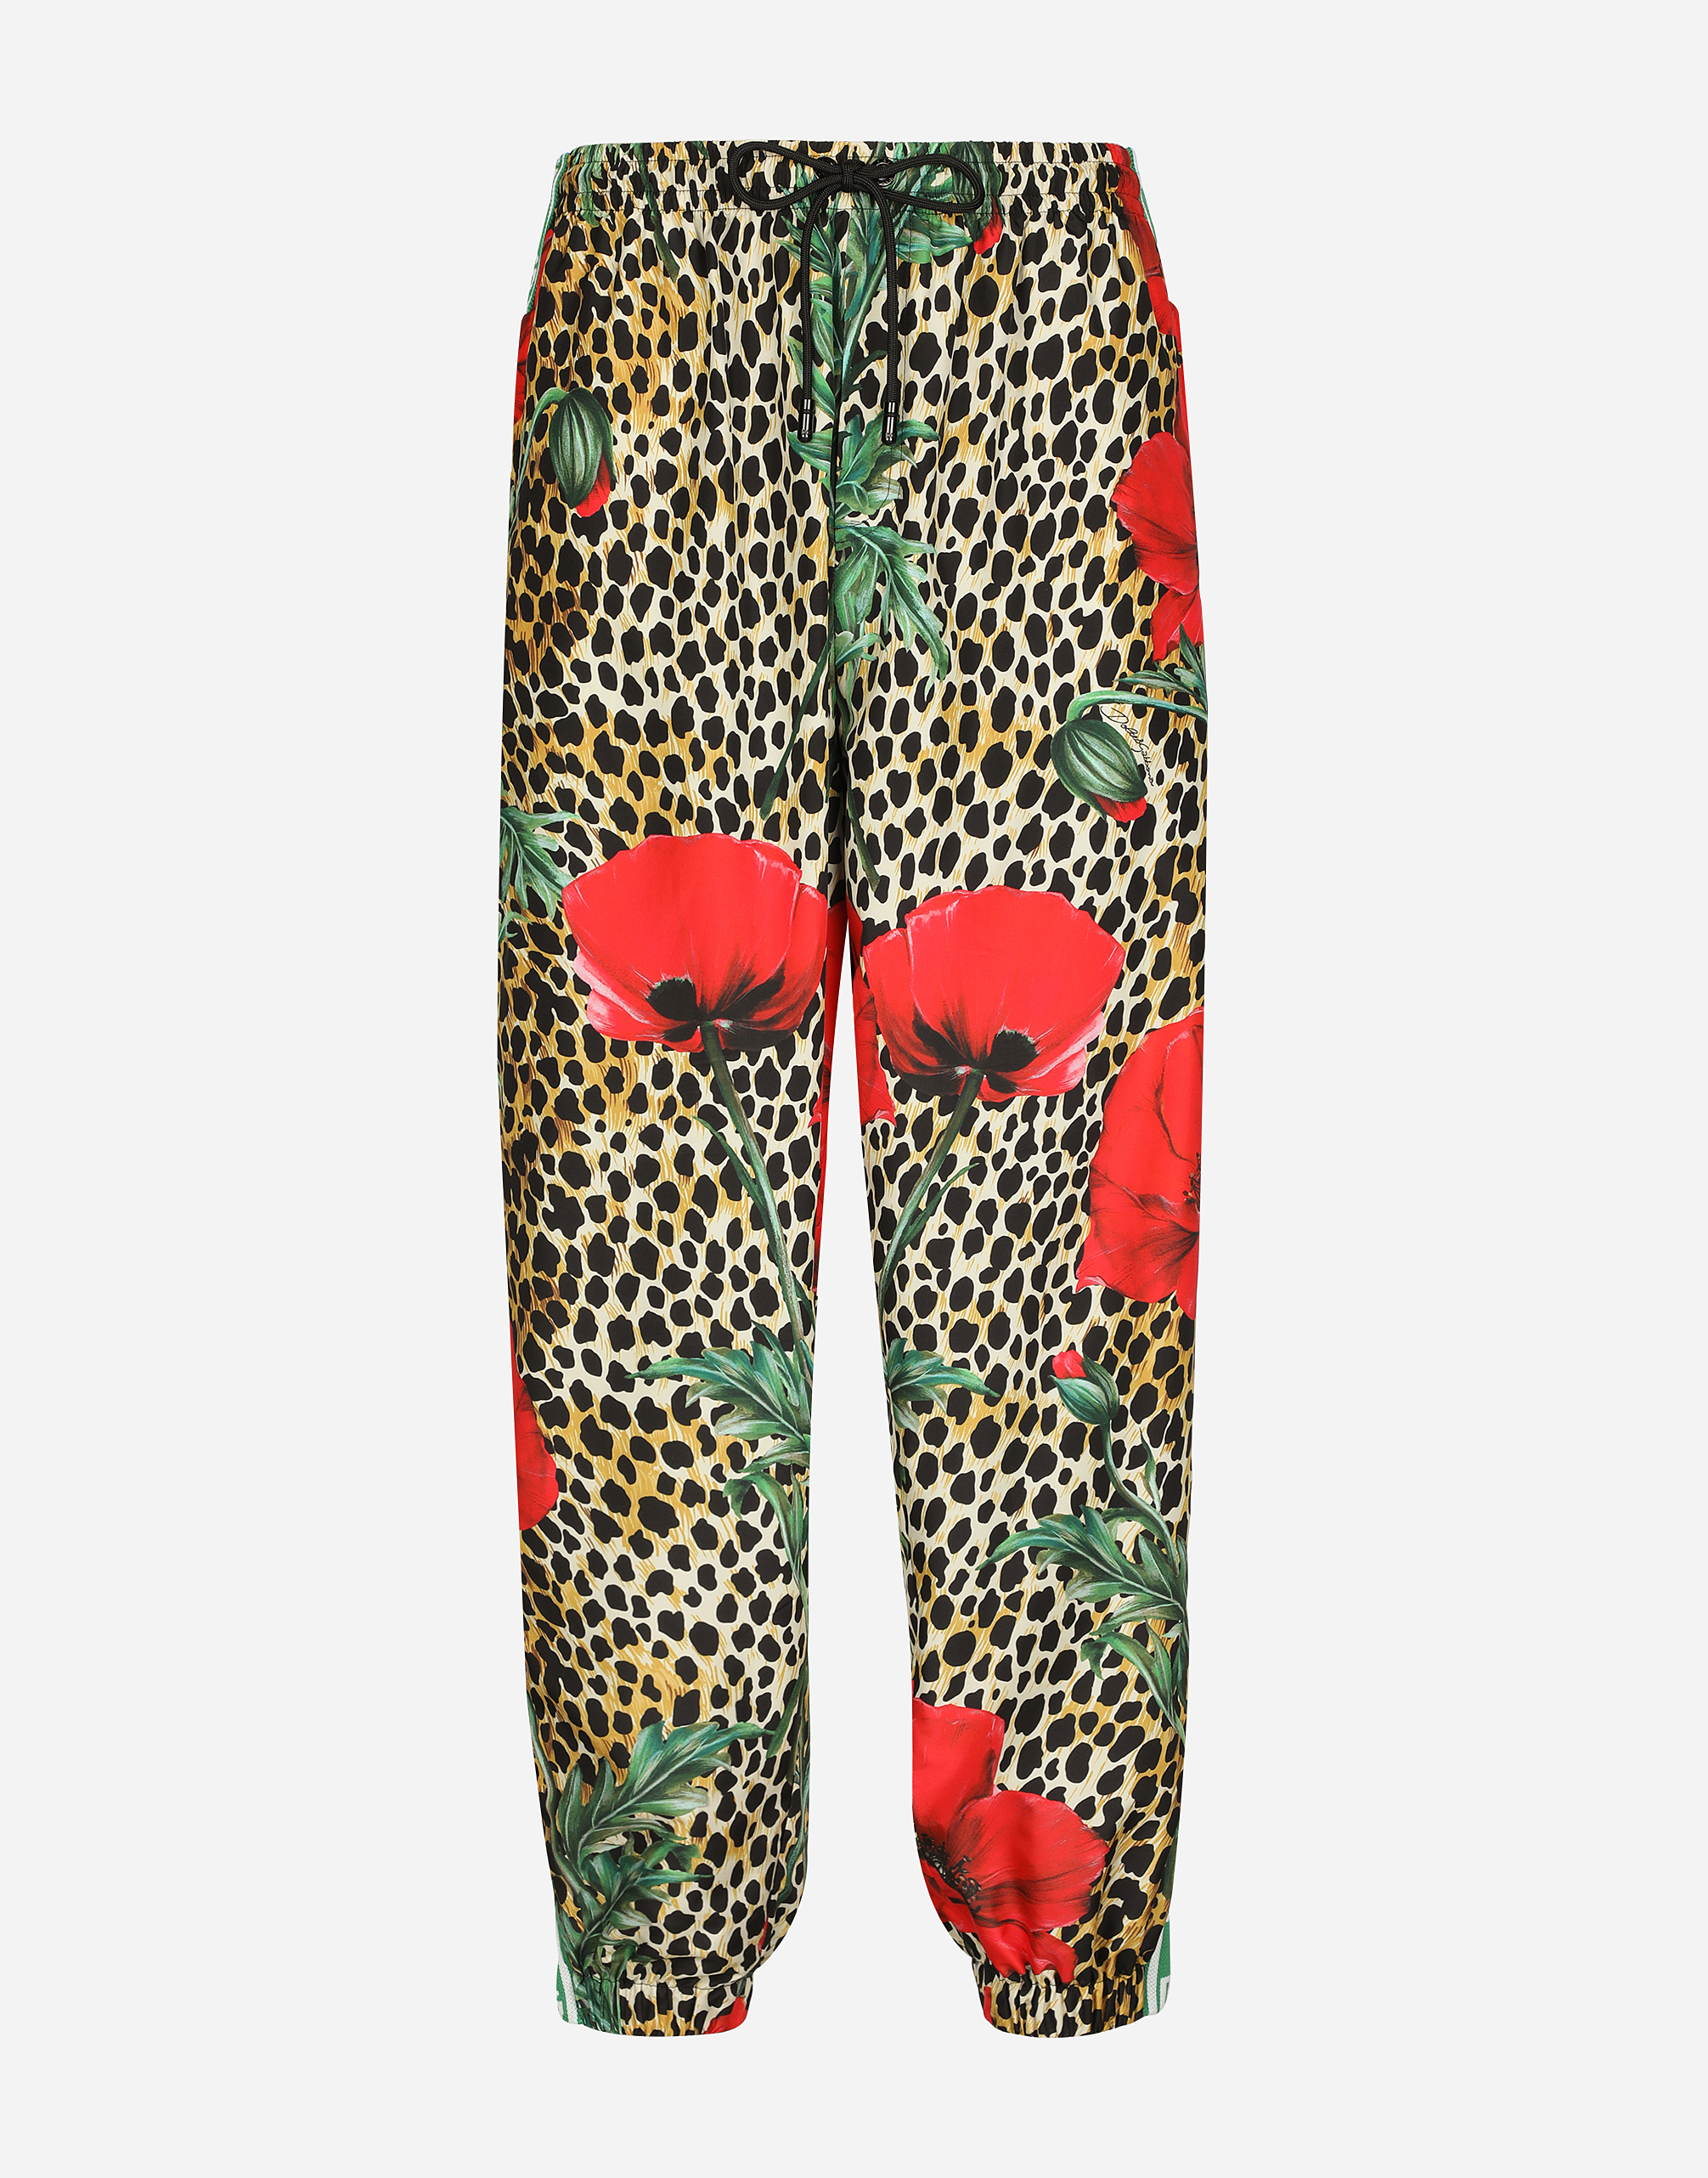 Nylon jogging pants with poppy and ocelot print in Multicolor